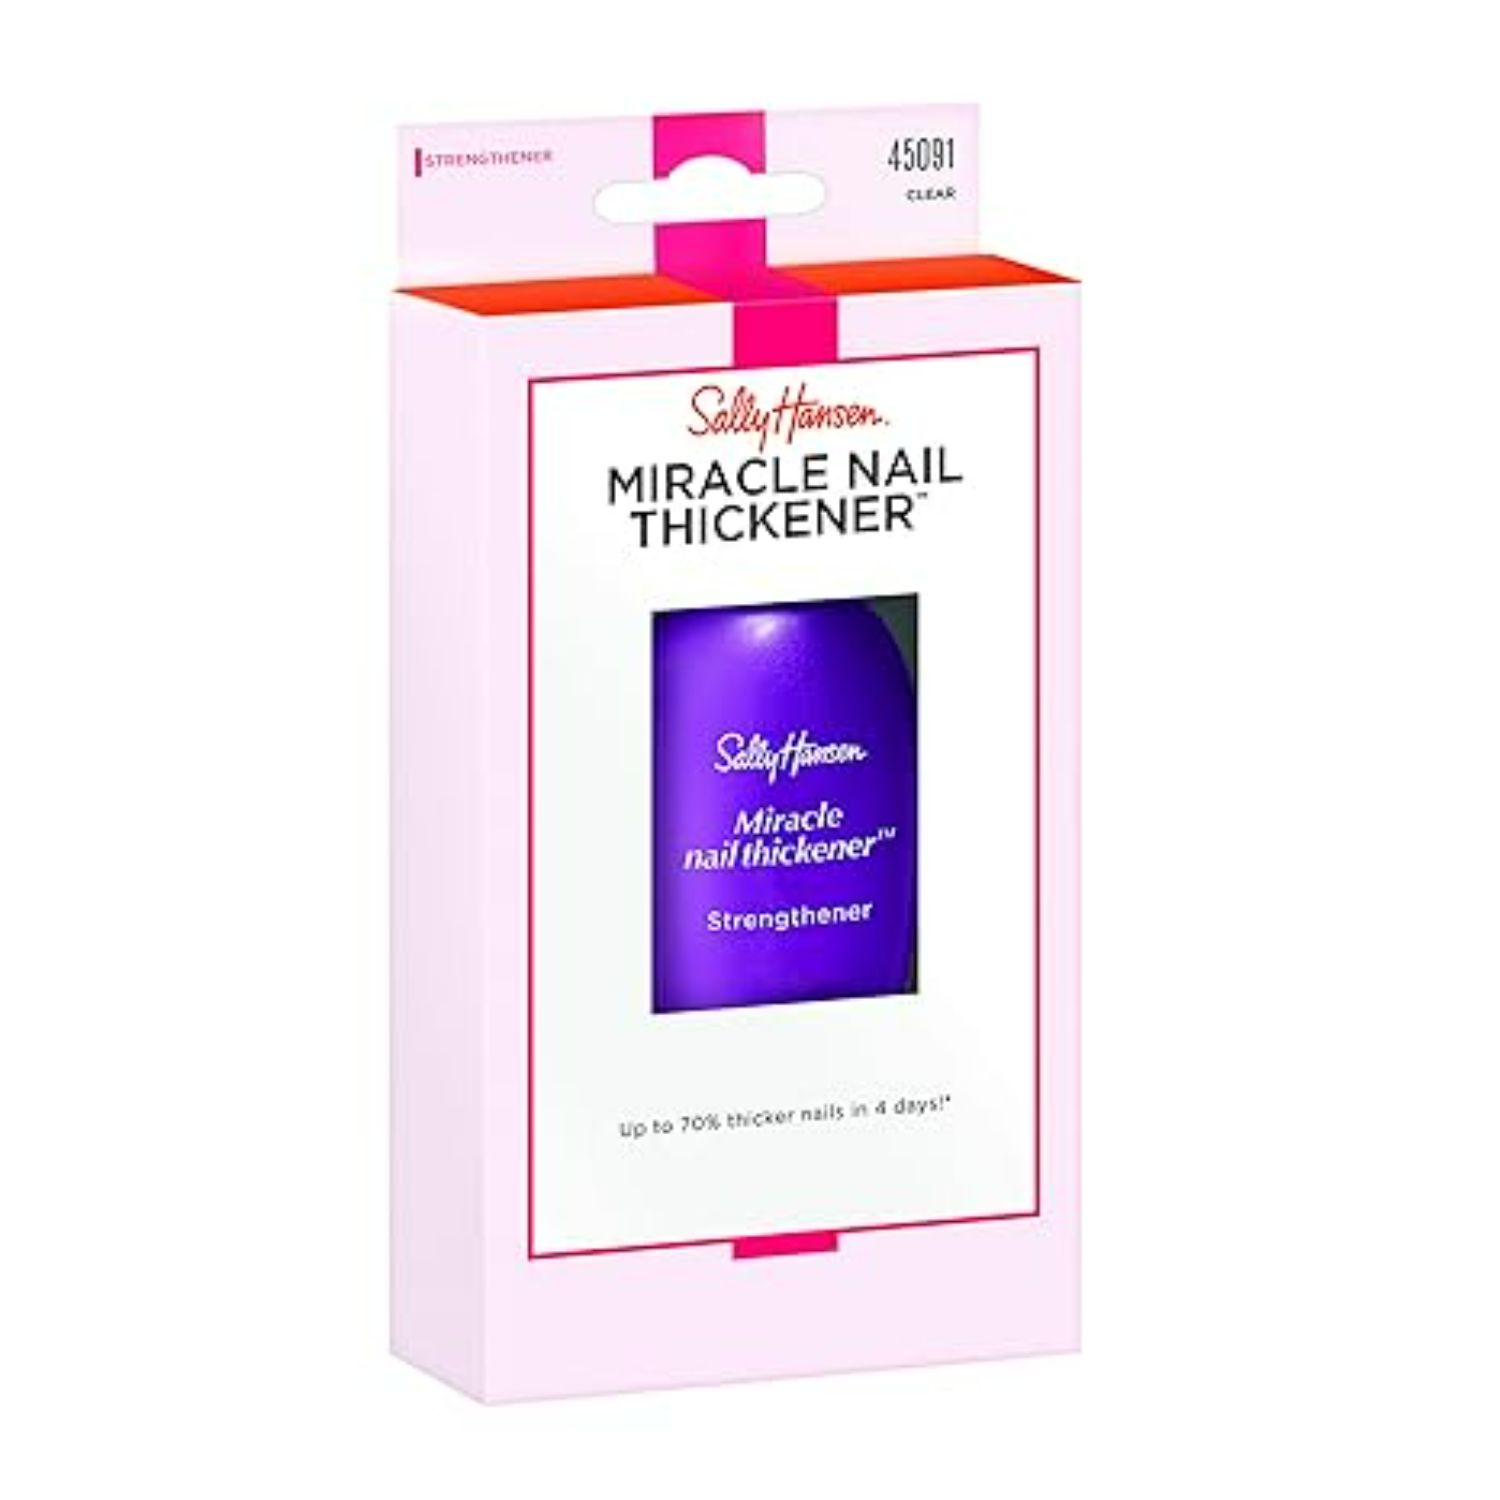 Sally Hansen Miracle Nail Thickener Fortifiant - Clear, 0.45 oz Treatment - image 5 of 5